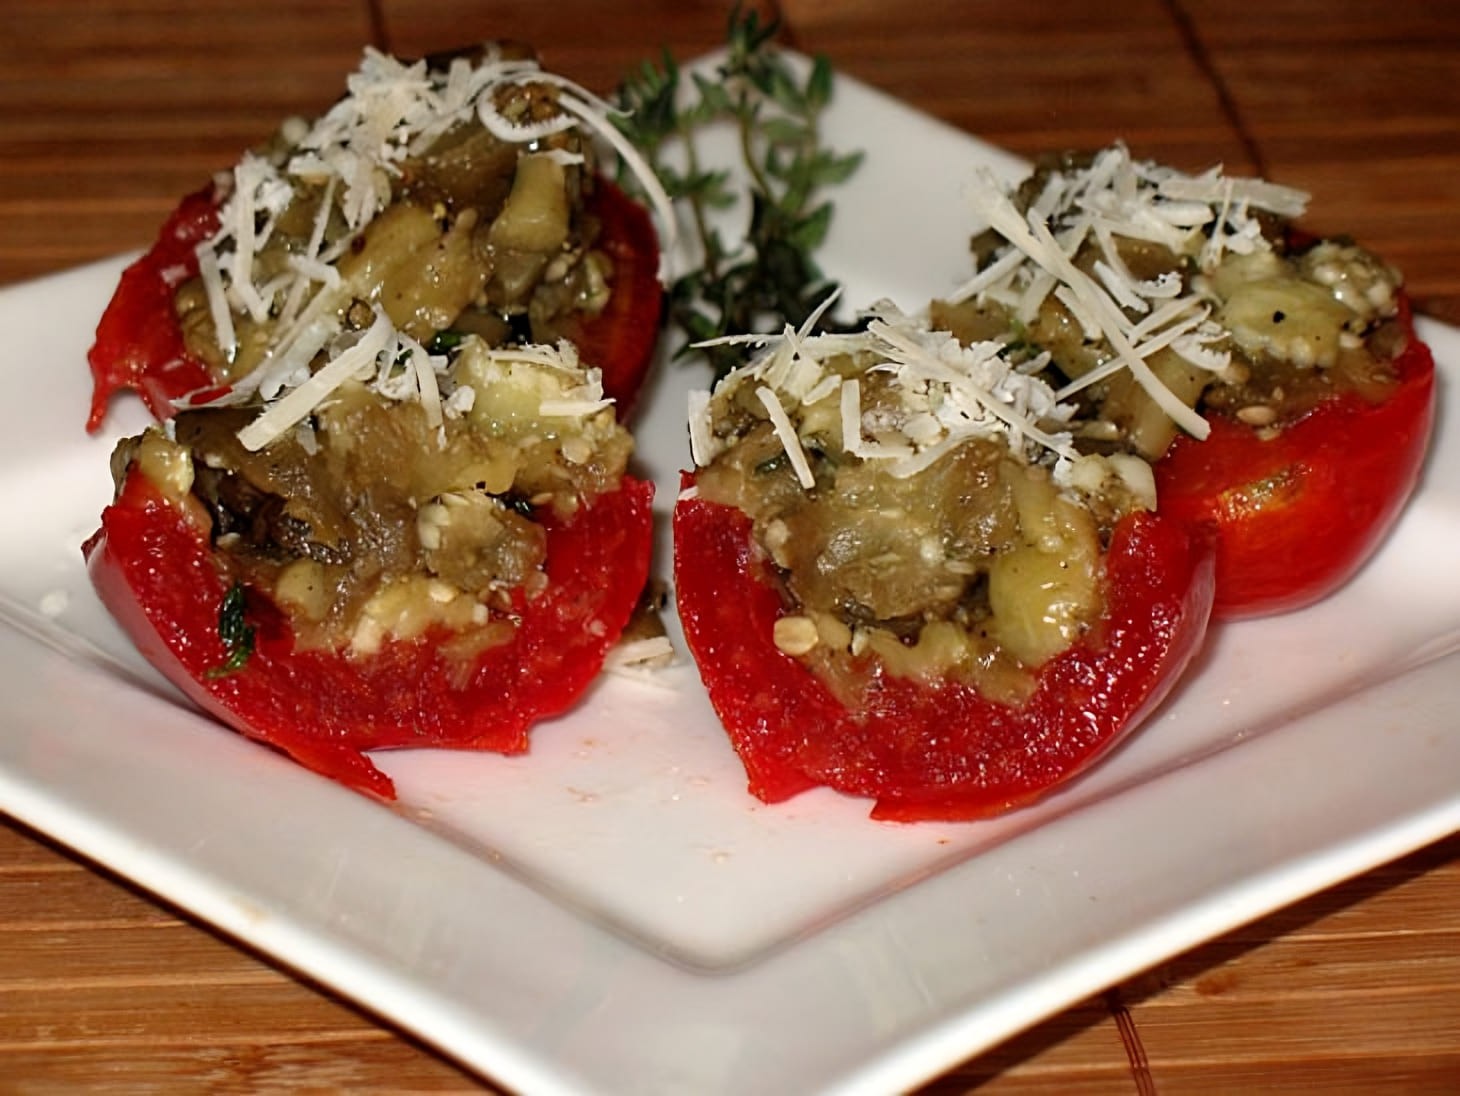 Tomatoes with Eggplant Filling "Mediterranean Ships"